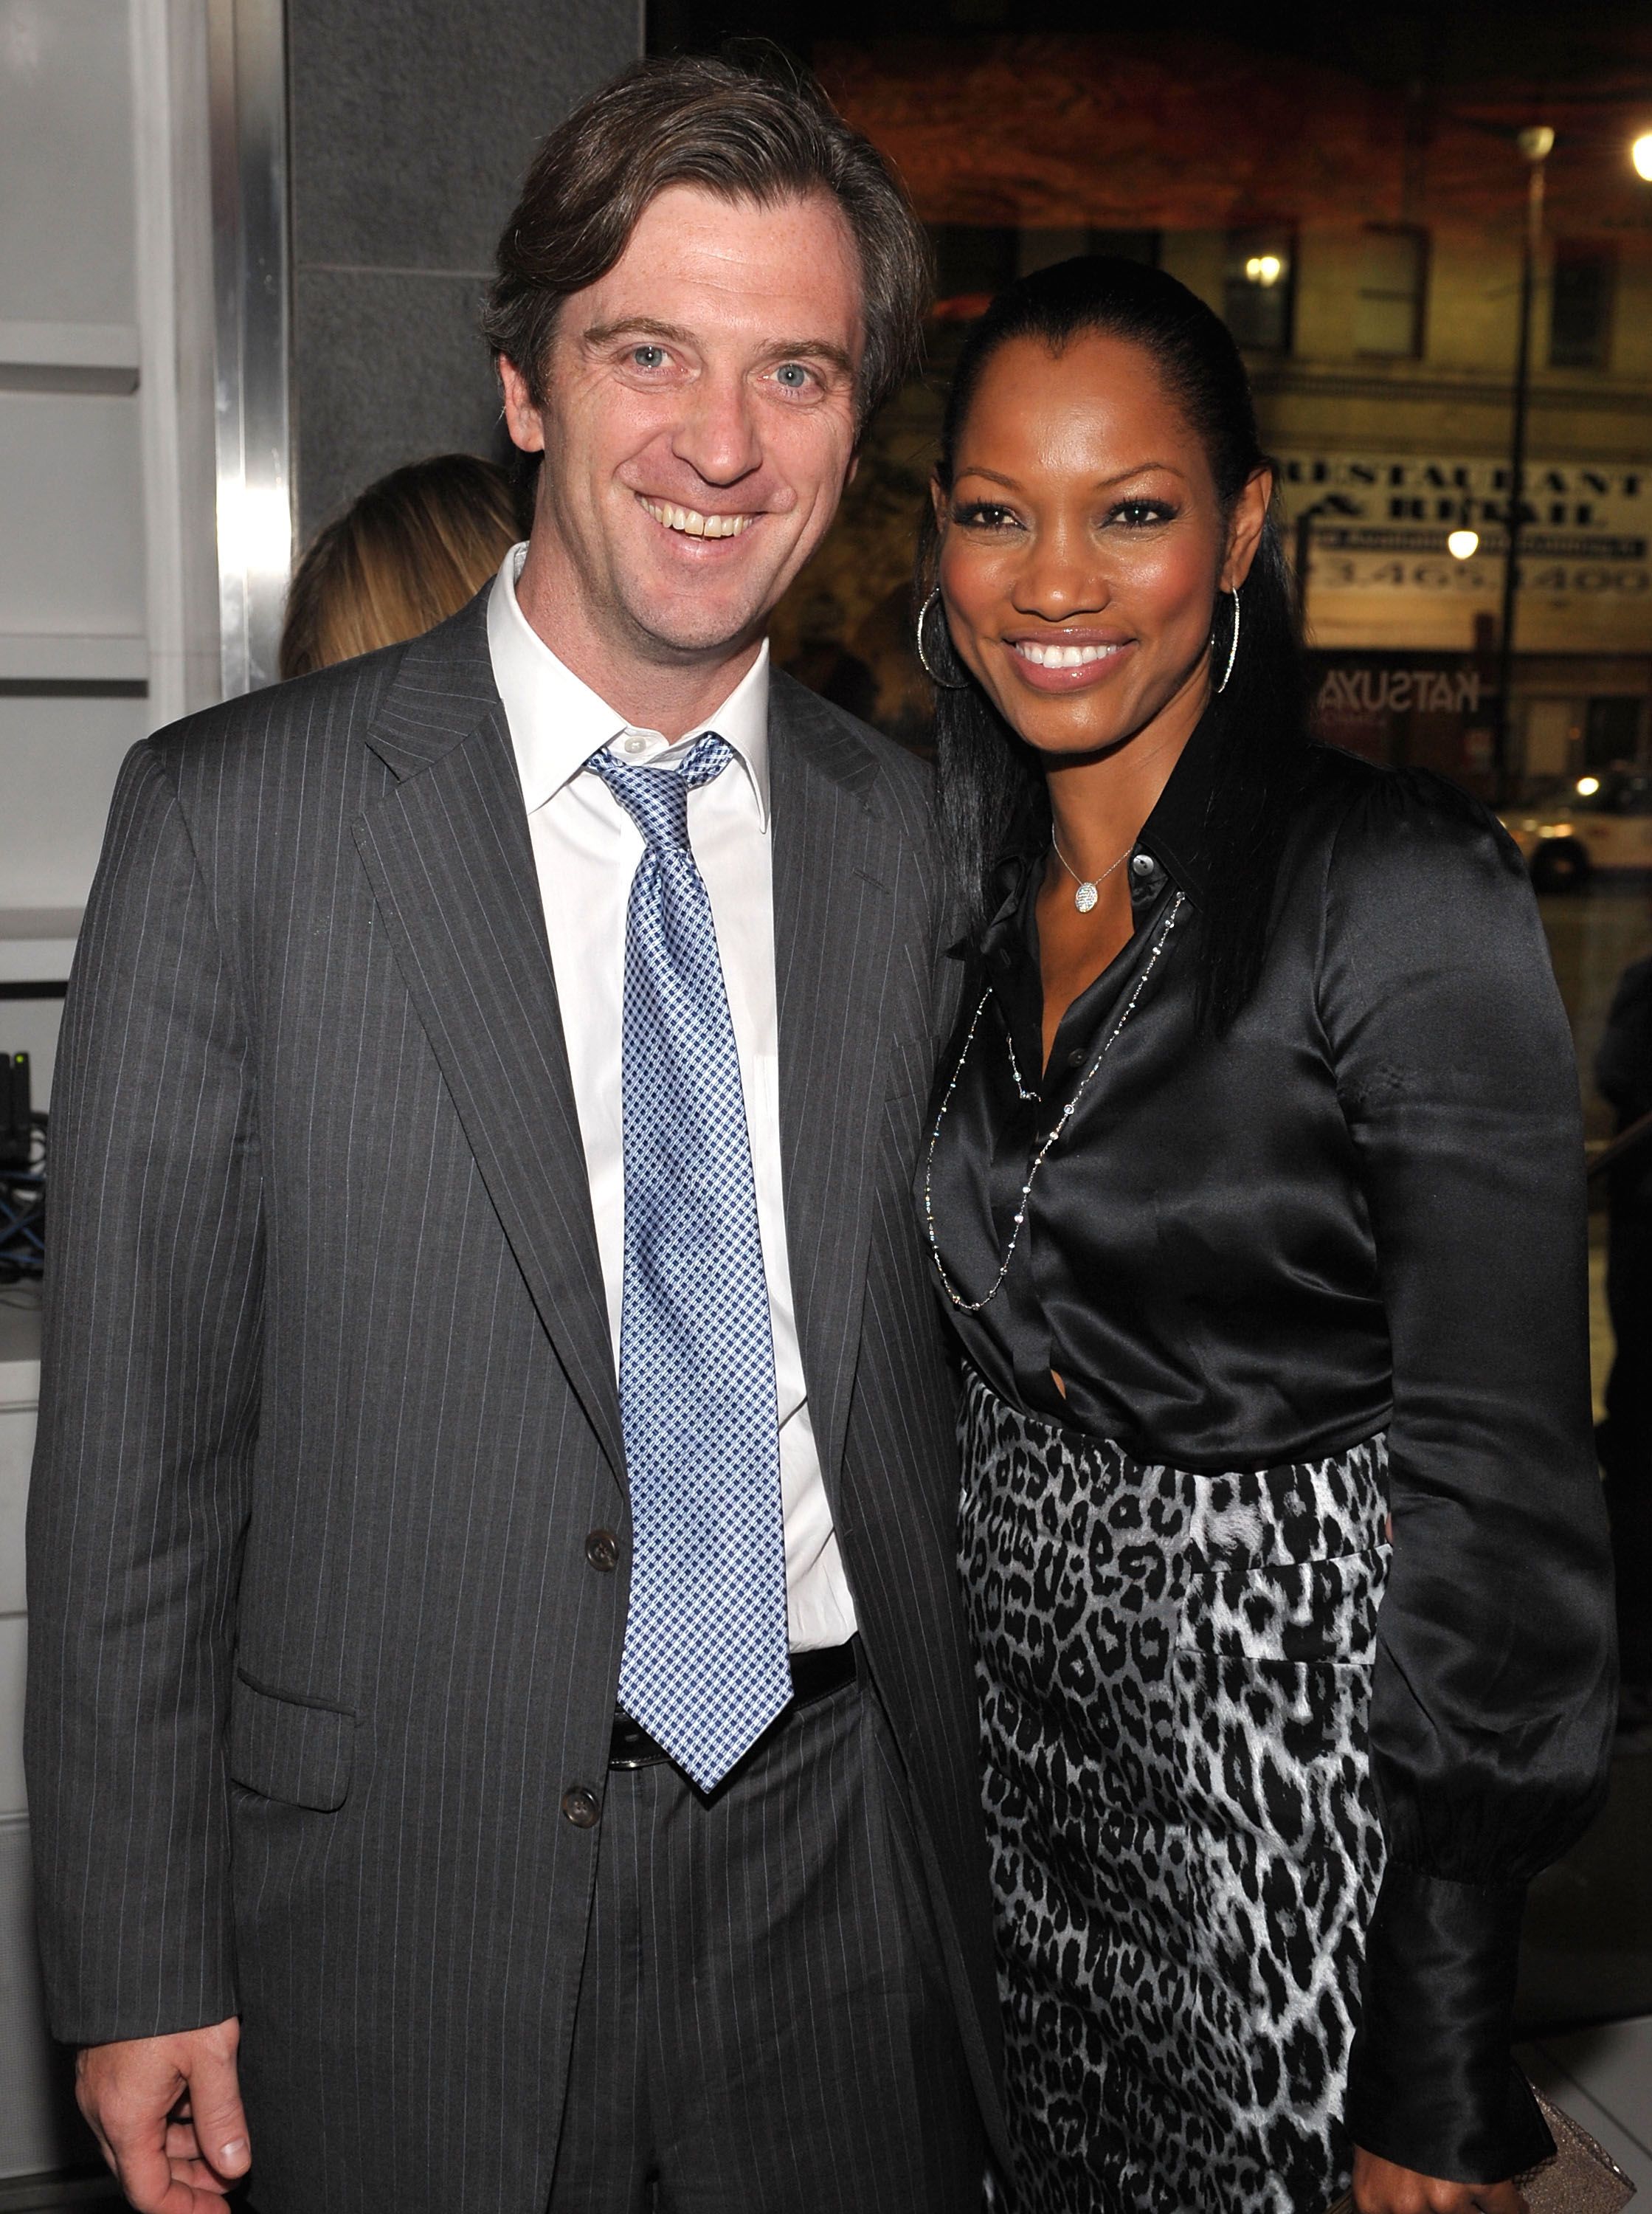 Actress Garcelle Beauvais-Nilon and Mike Nilon attend the after party for the Los Angeles premiere of "Spread" at Katsuya on August 3, 2009 | Photo: Getty Images